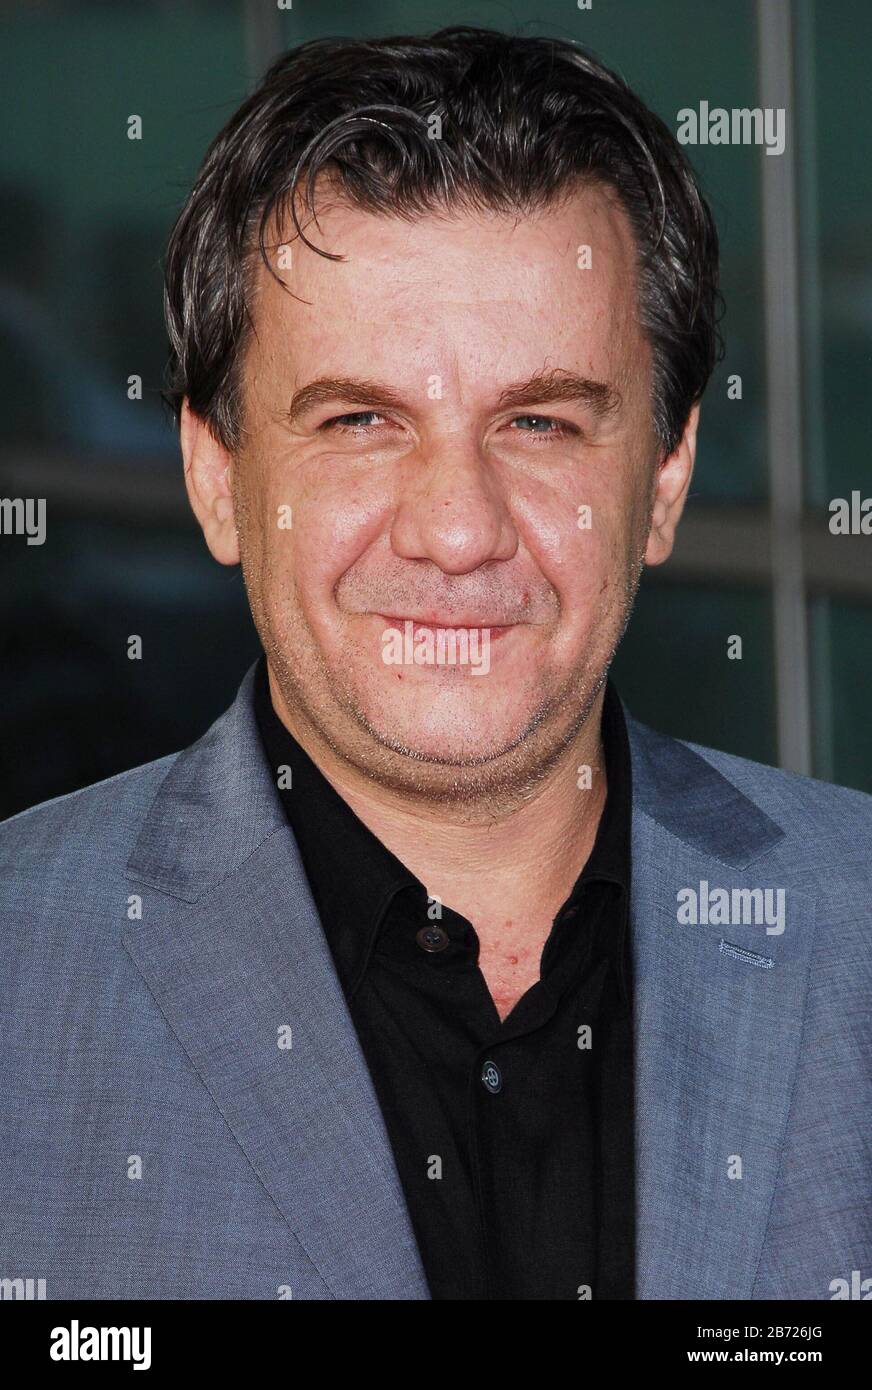 Director Alejandro Agresti at the World Premiere of 'The Lake House' held at the Pacific Cinerama Dome in Hollywood, CA. The event took place on Tuesday, June 13, 2006.  Photo by: SBM / PictureLux - All Rights Reserved - File Reference # 33984-3129SBMPLX Stock Photo